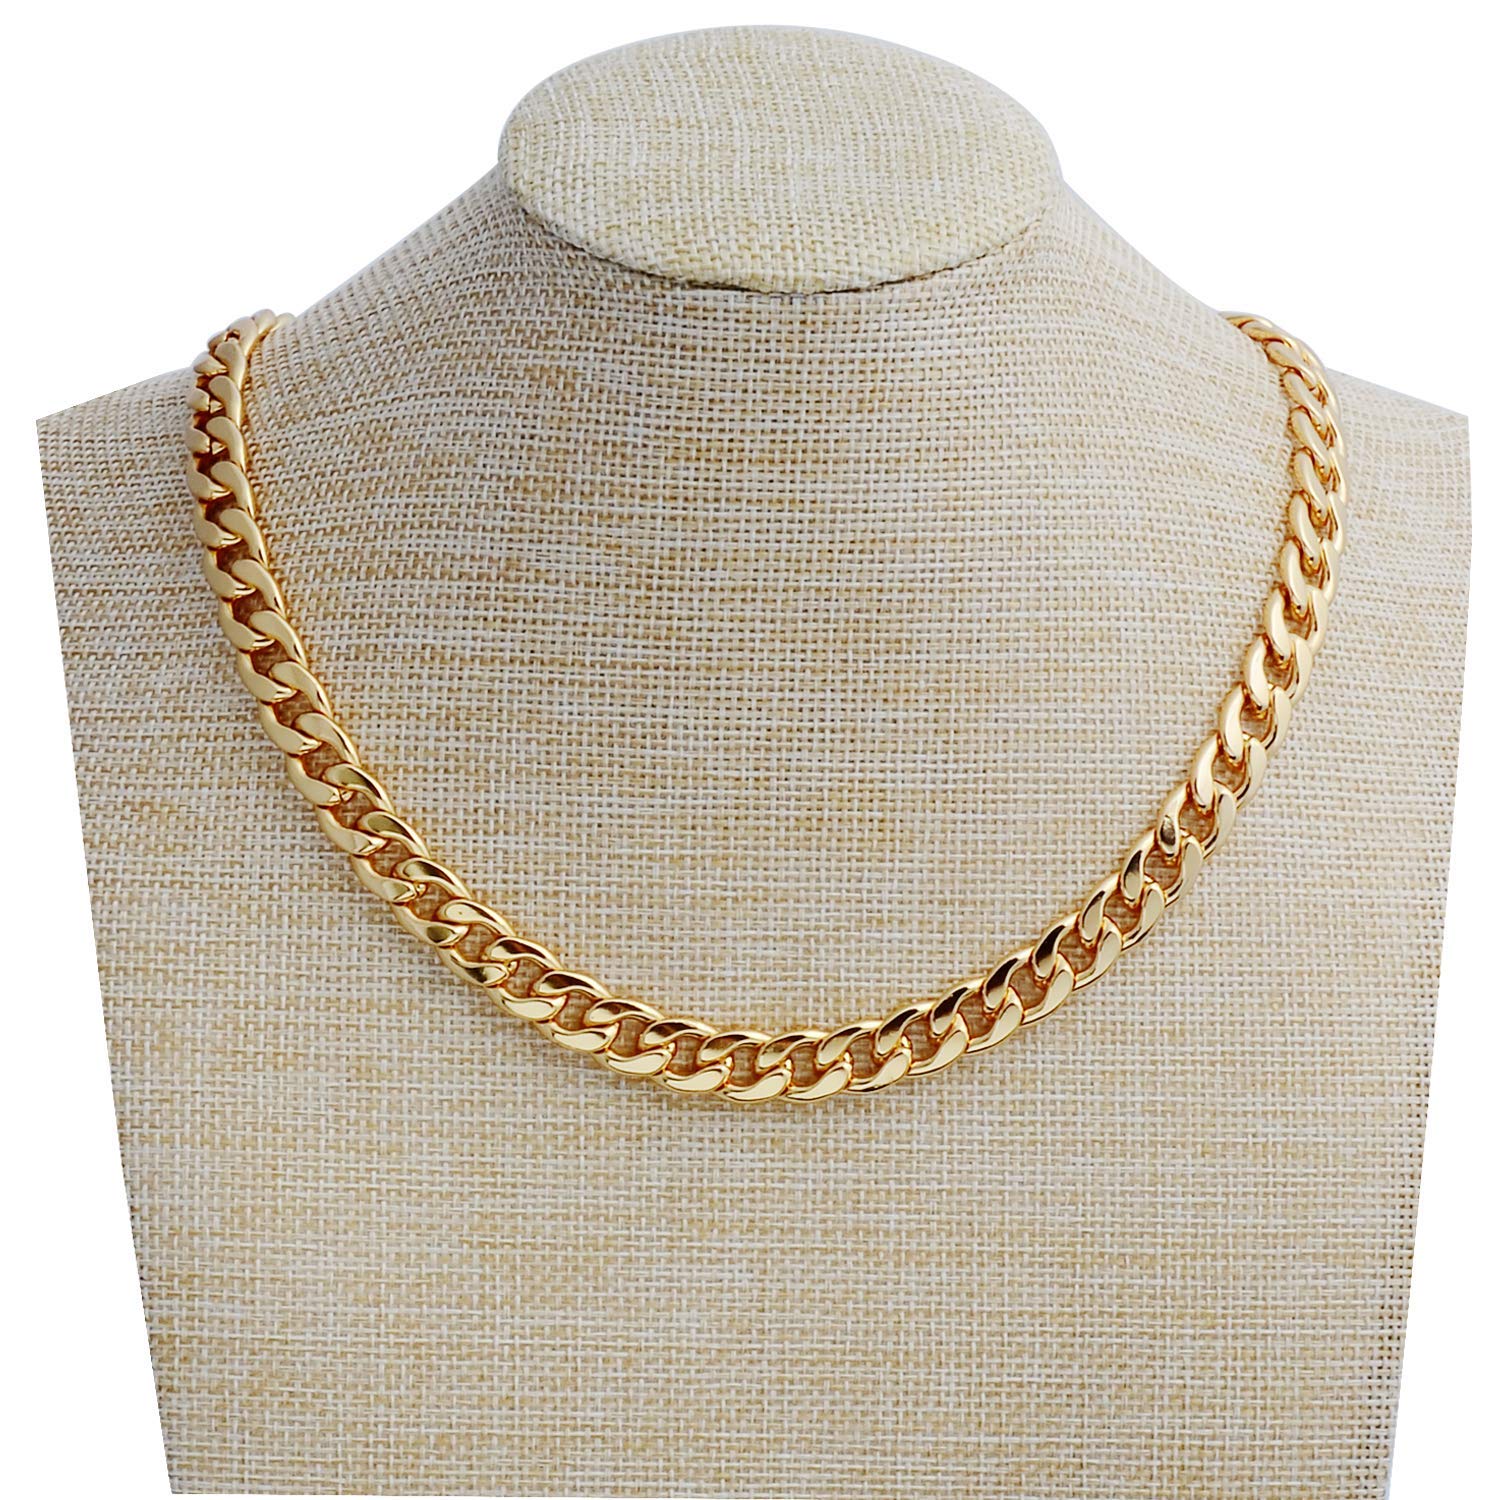 4 Easy Hacks: How to Clean Gold Chain at Home? Step by Step Guide